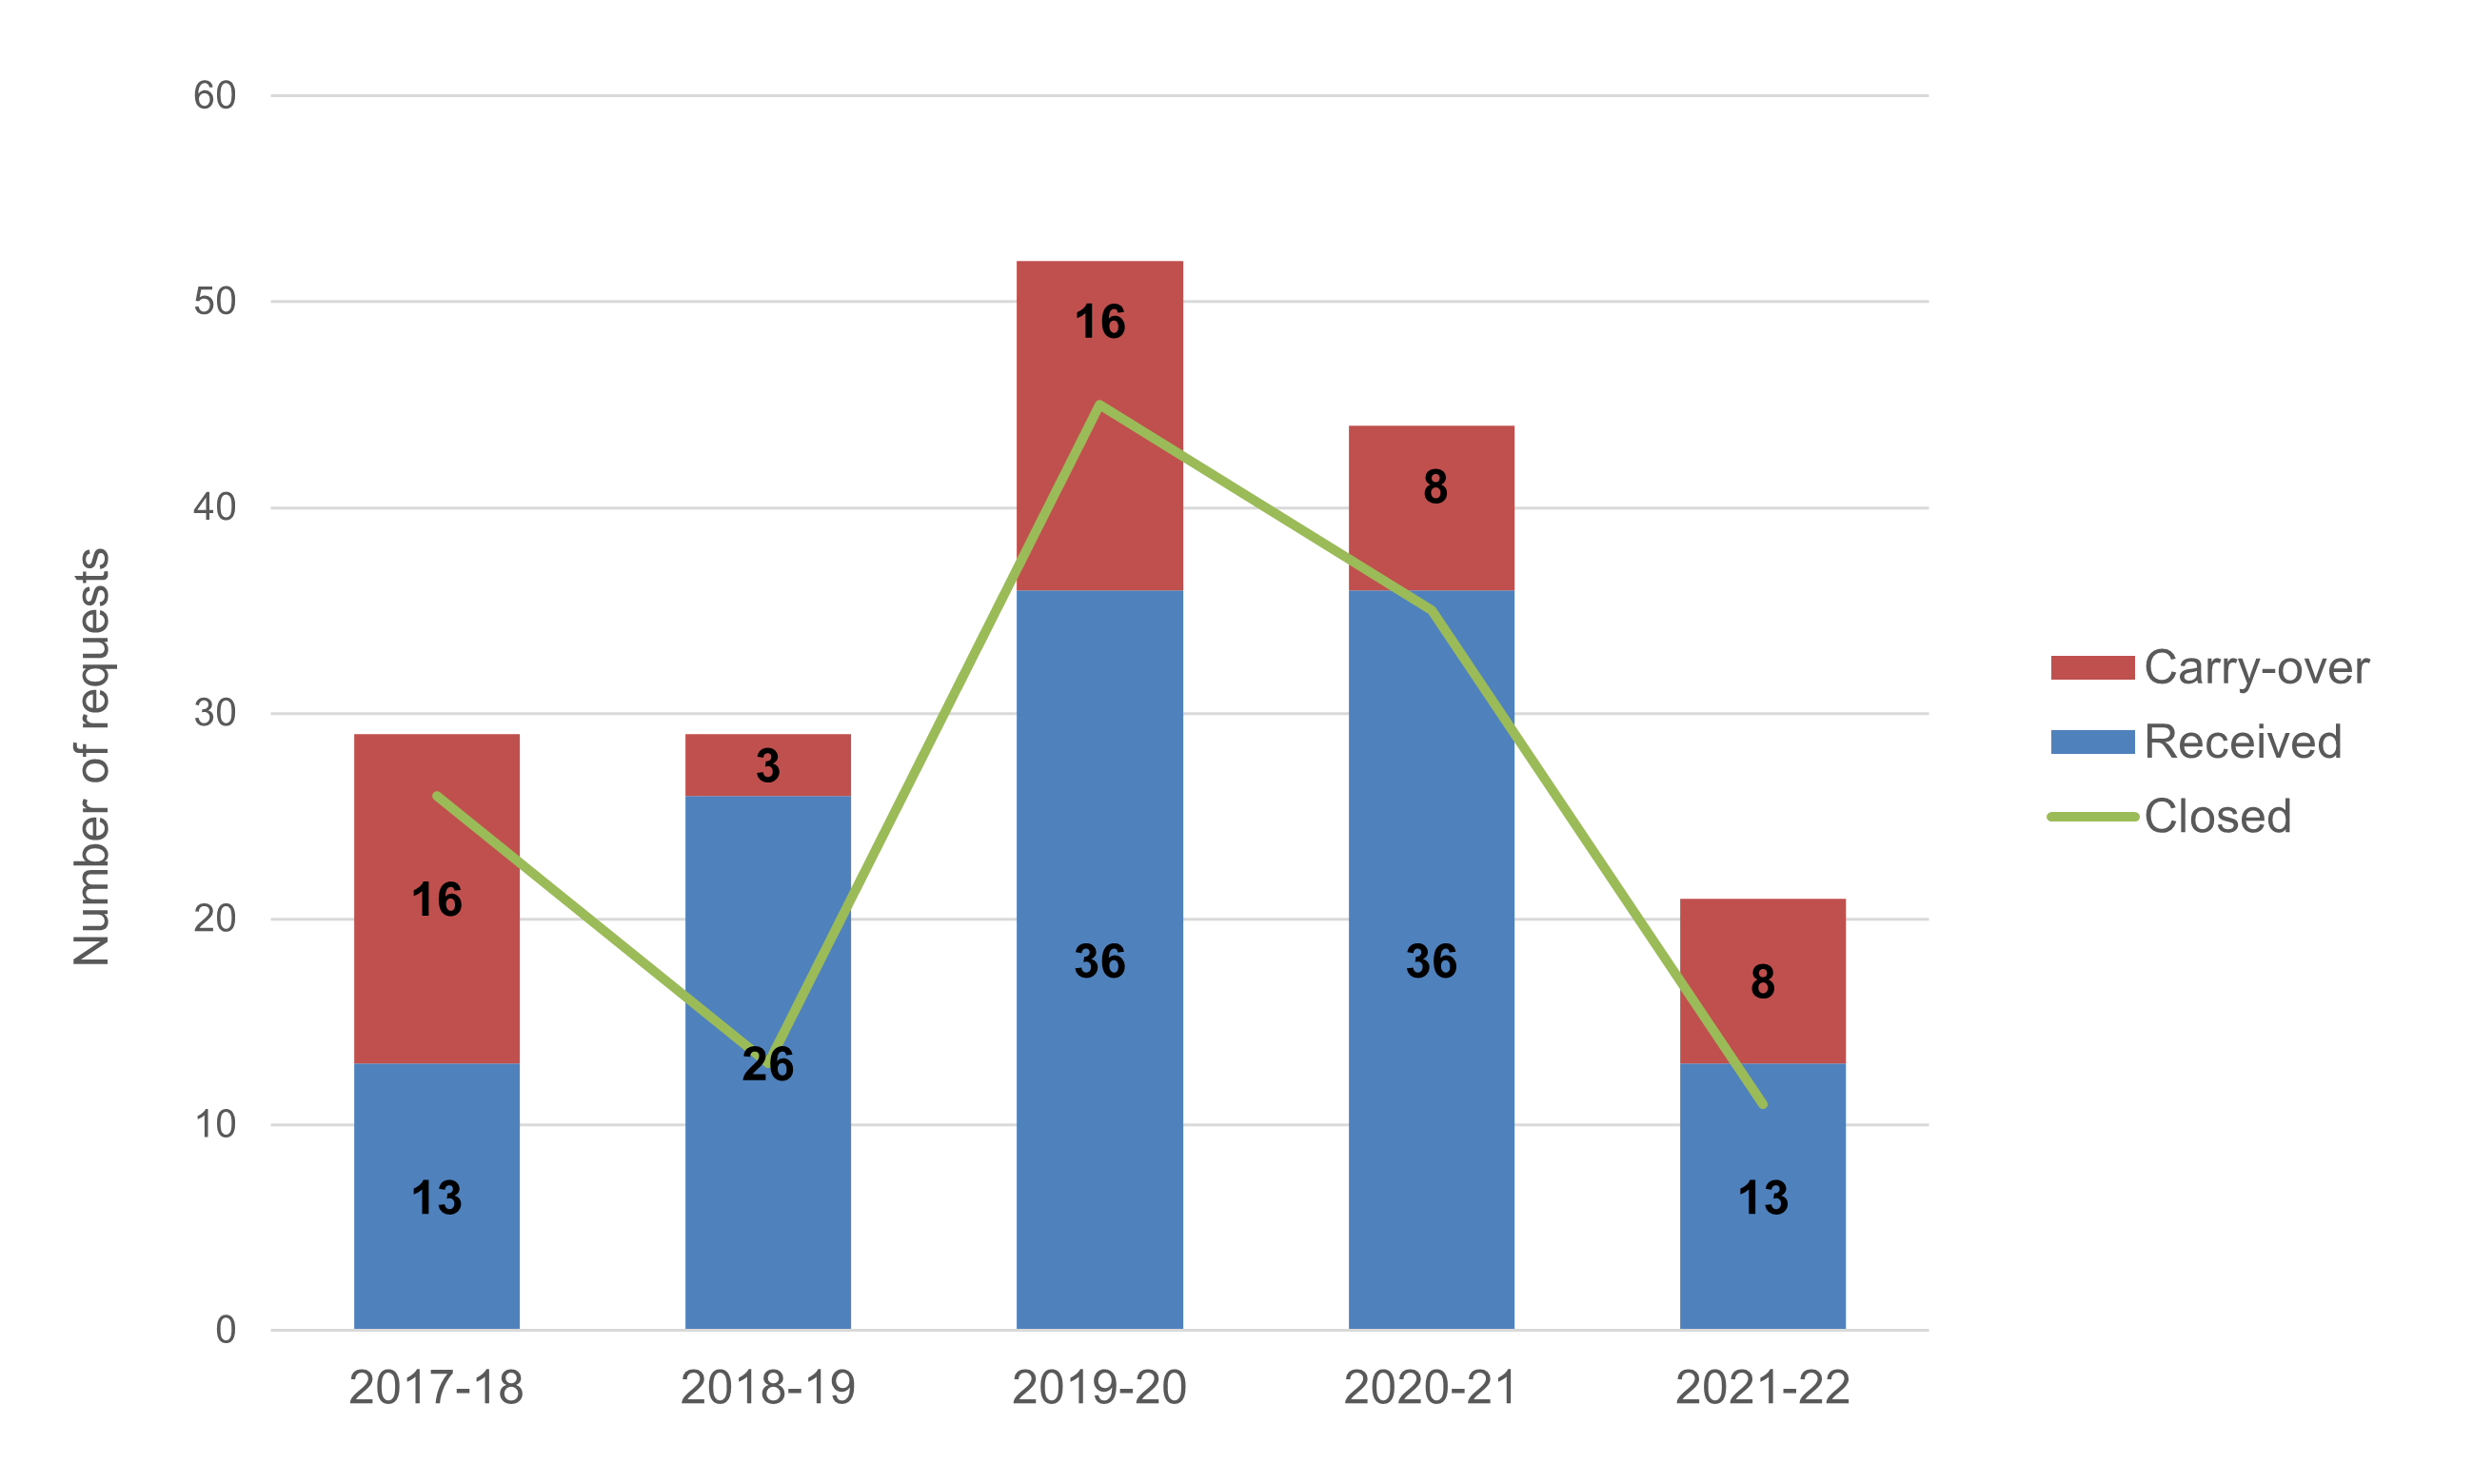 Figure 1: Number of requests carried over, received, and closed from 2017 to 2022